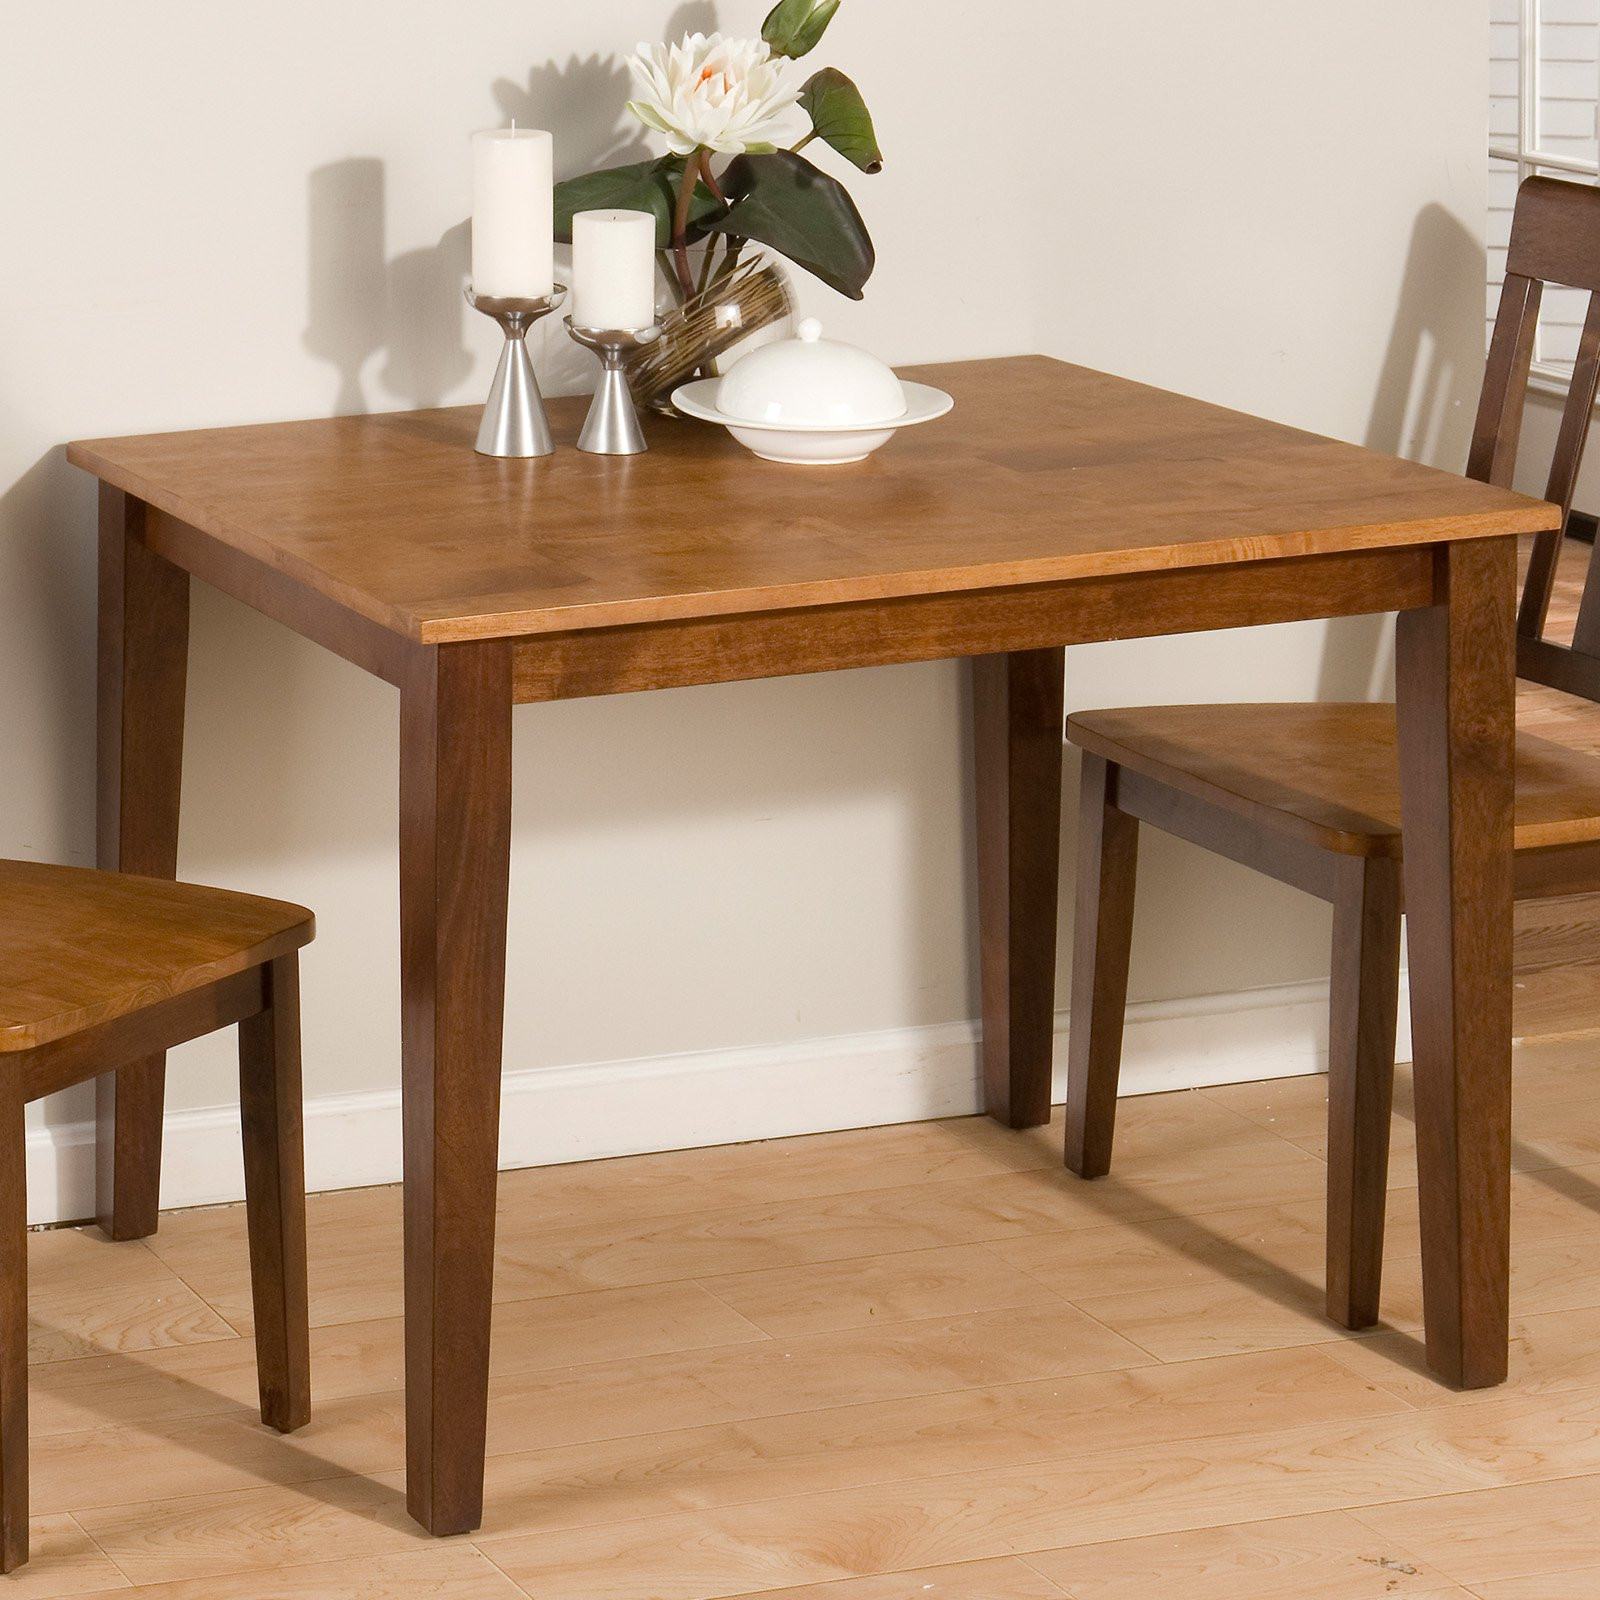 Small Kitchen Table Sets
 Small Rectangular Kitchen Table – HomesFeed